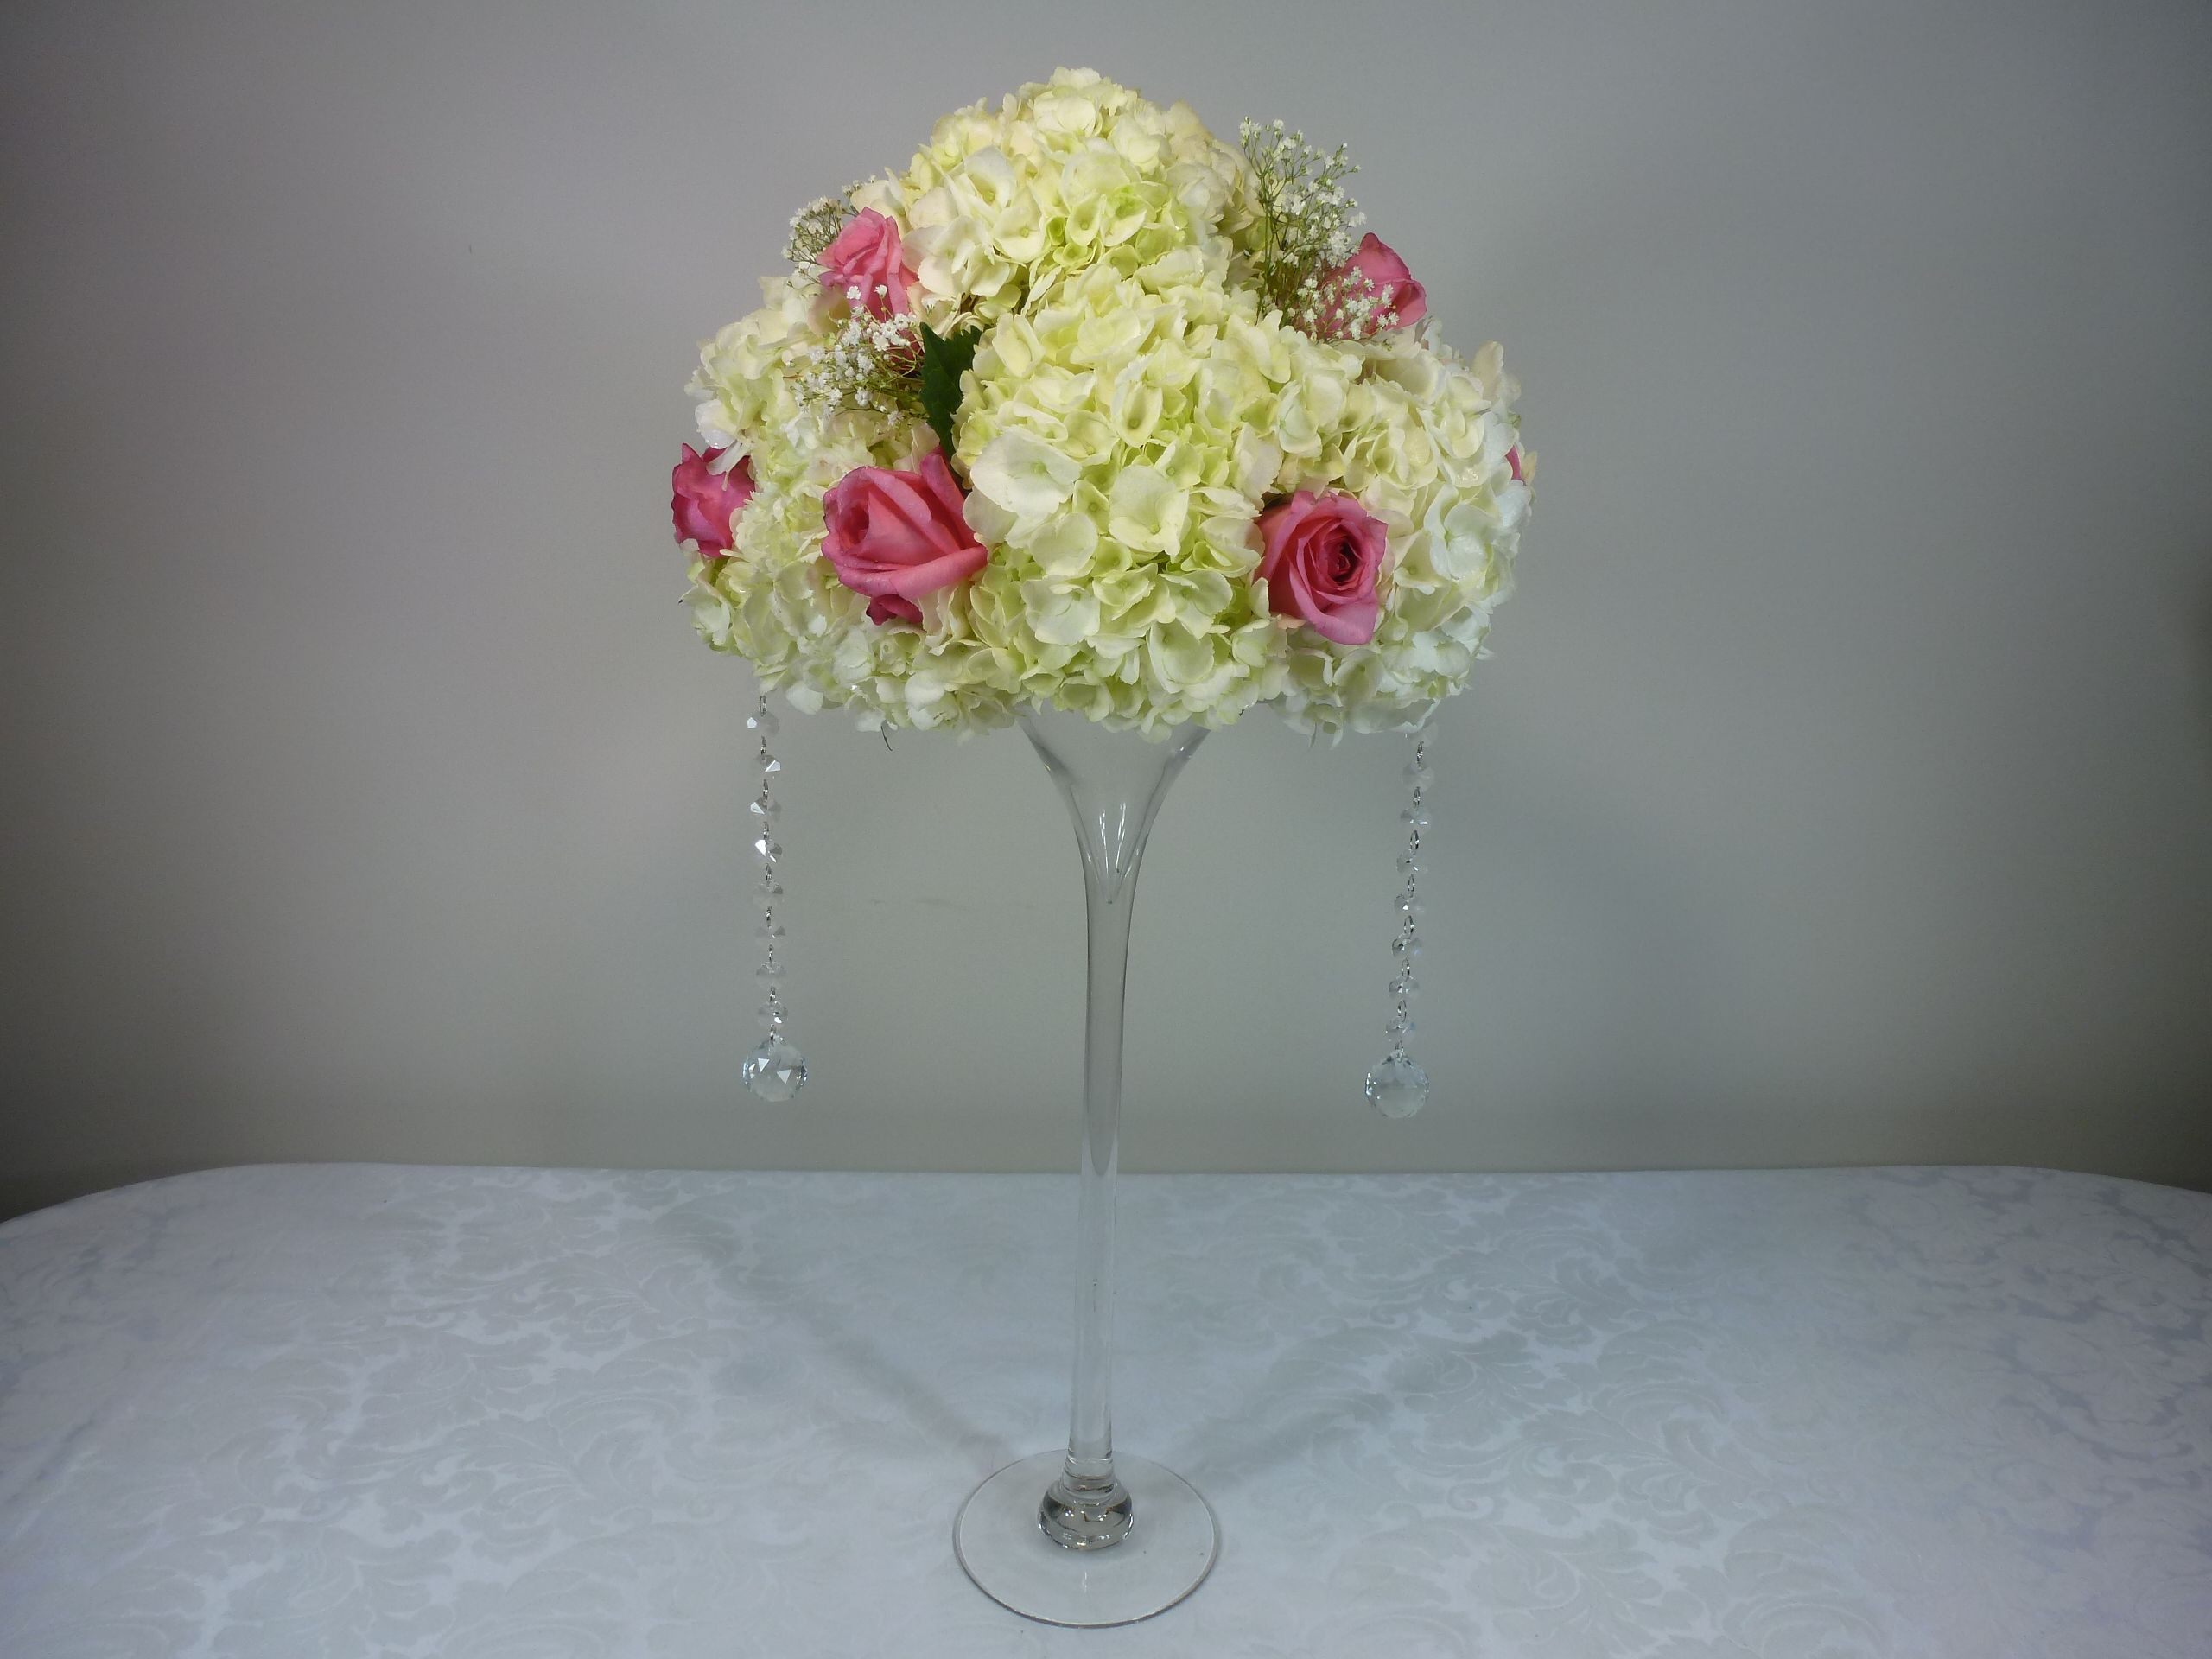 18 Unique Flower Delivery without Vase 2024 free download flower delivery without vase of 45 how to make silk flower arrangements for cemetery vases the intended for martini vase wedding centerpieces vase and cellar image avorcor